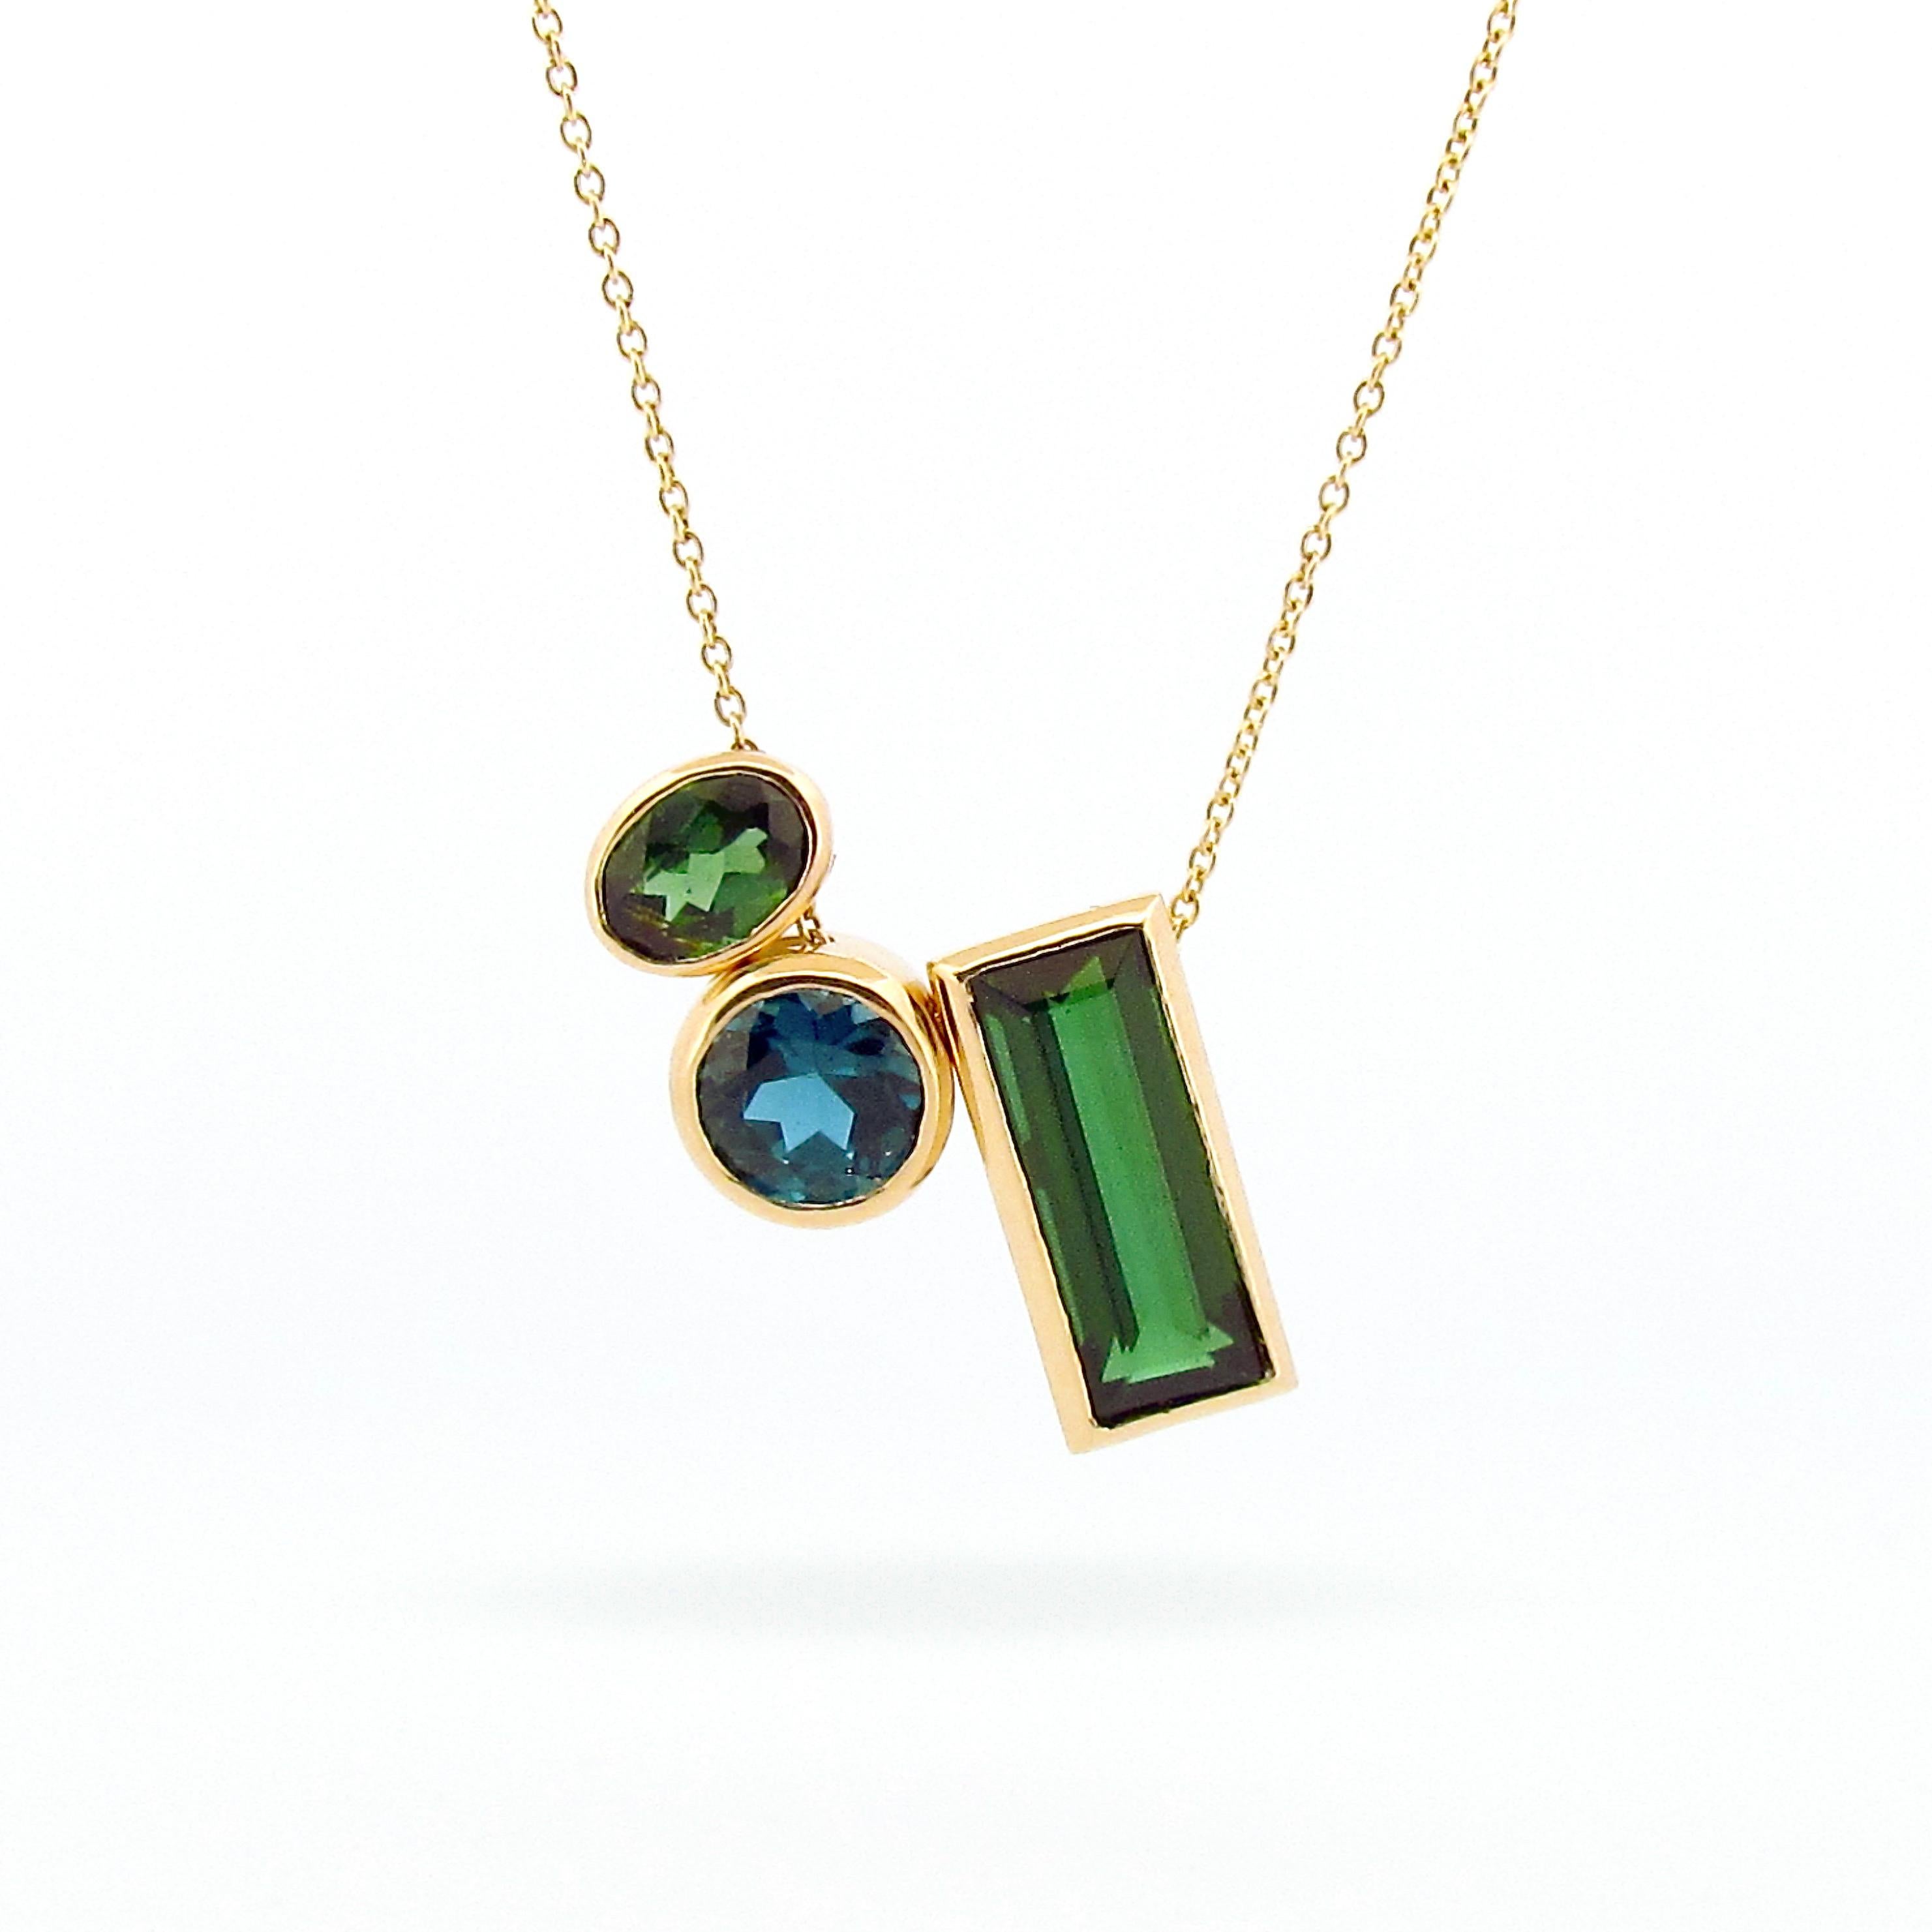 This 9ct solid Gold Sliding pendant is set with a beautiful 3.35ct deep Green step cut  Baguette Tourmaline, this is a one of a kind necklace, The deep green hues and beautiful cut captures the eye, making this piece a fun statement piece to wear on